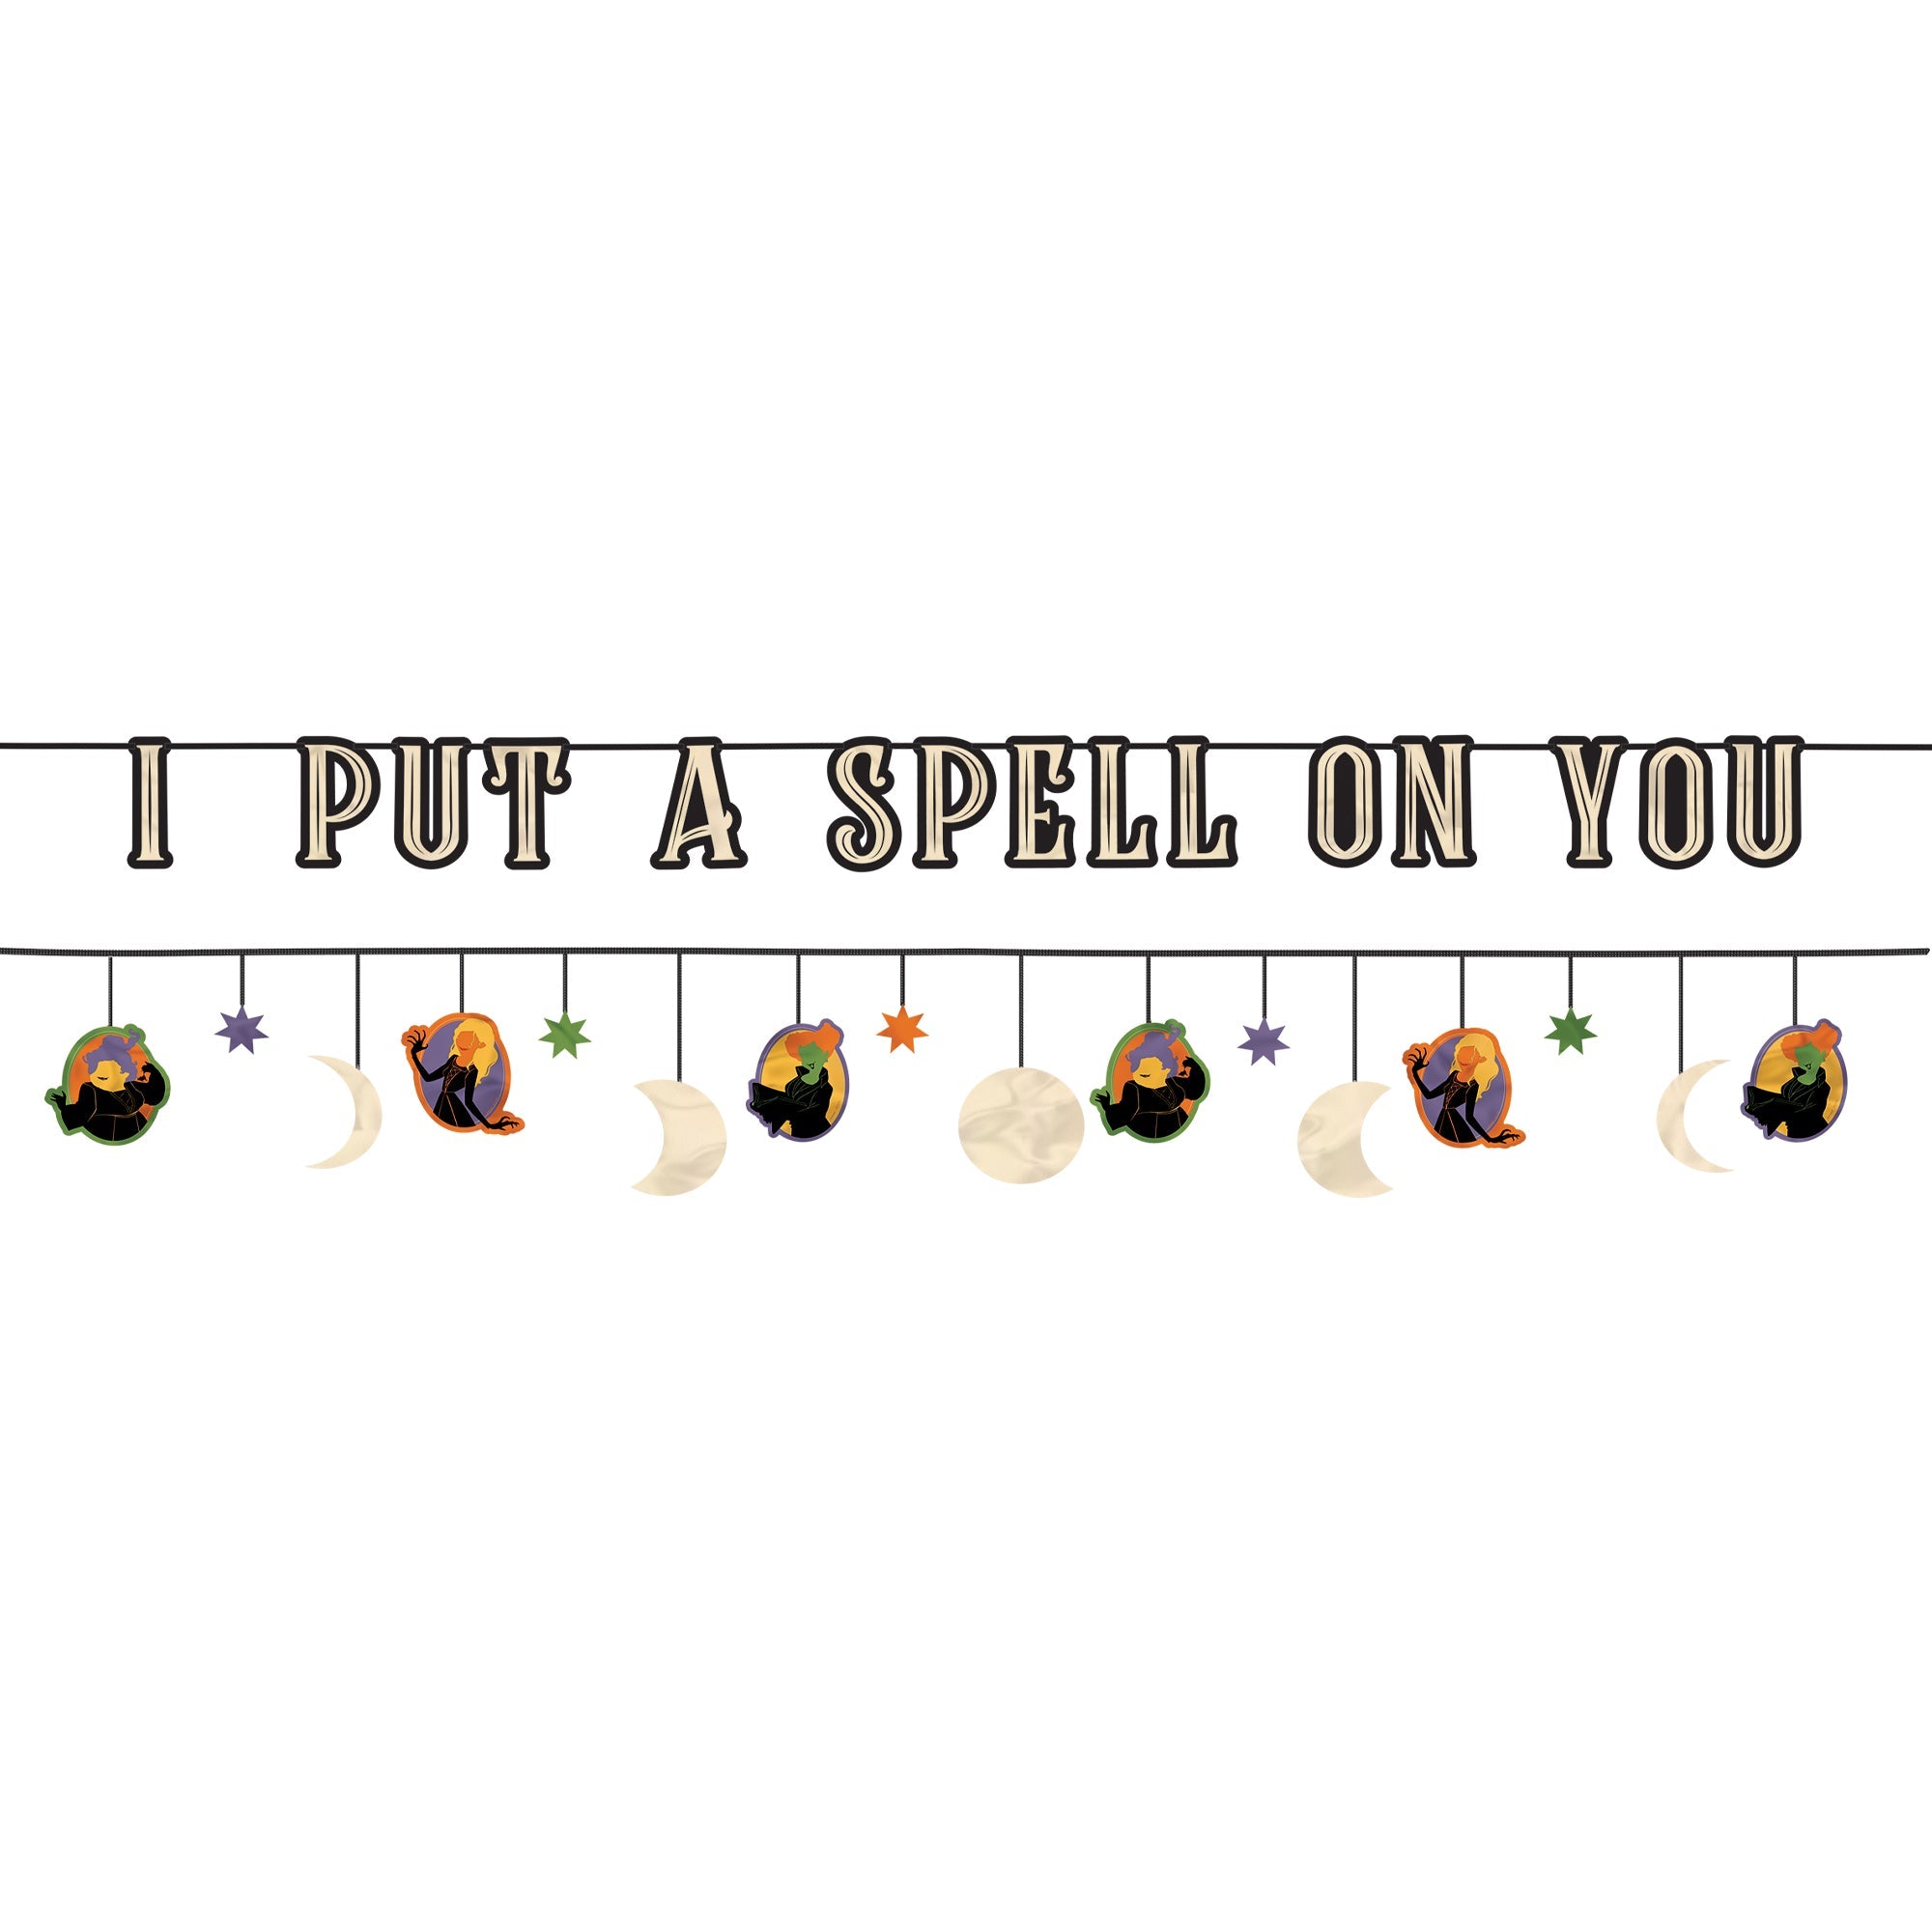 Hocus Pocus 2 Pack Banner set with 1 "I PUT A SPELL ON YOU" banner 12',  and 1 12' banner wit hdrop down cutouts